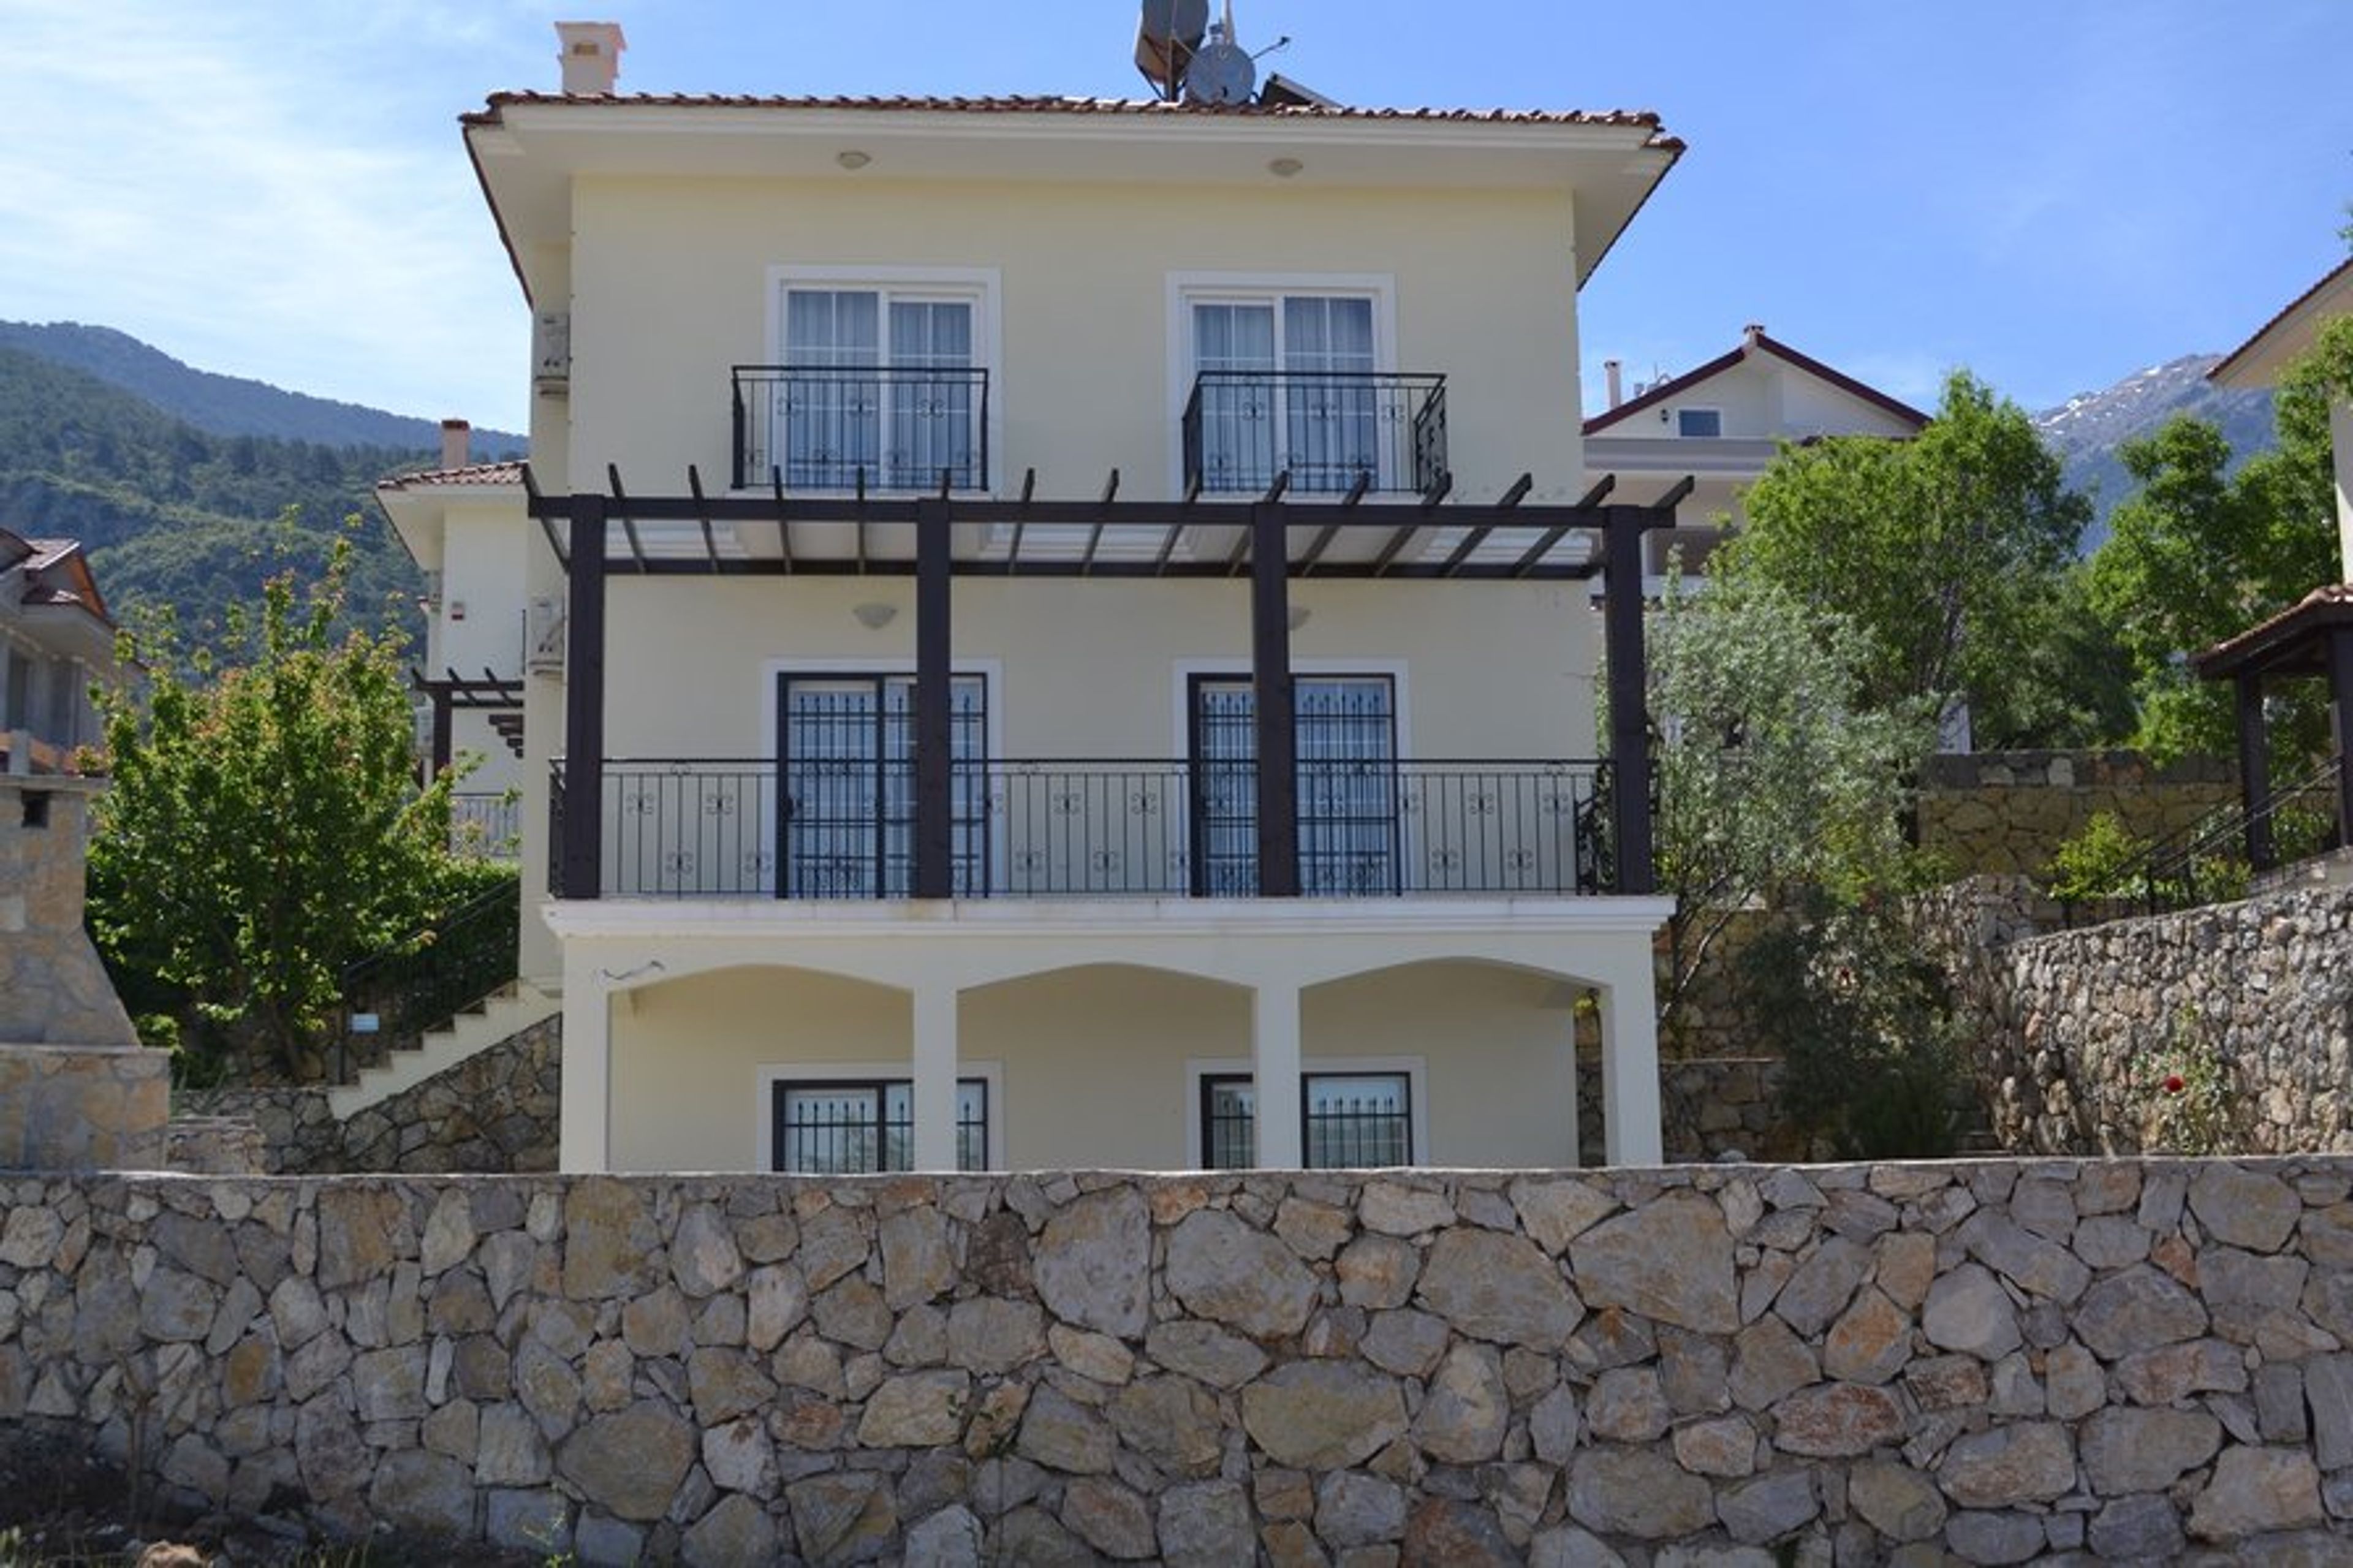 Front of Akaysa detached villa, not overlooked, mountain views